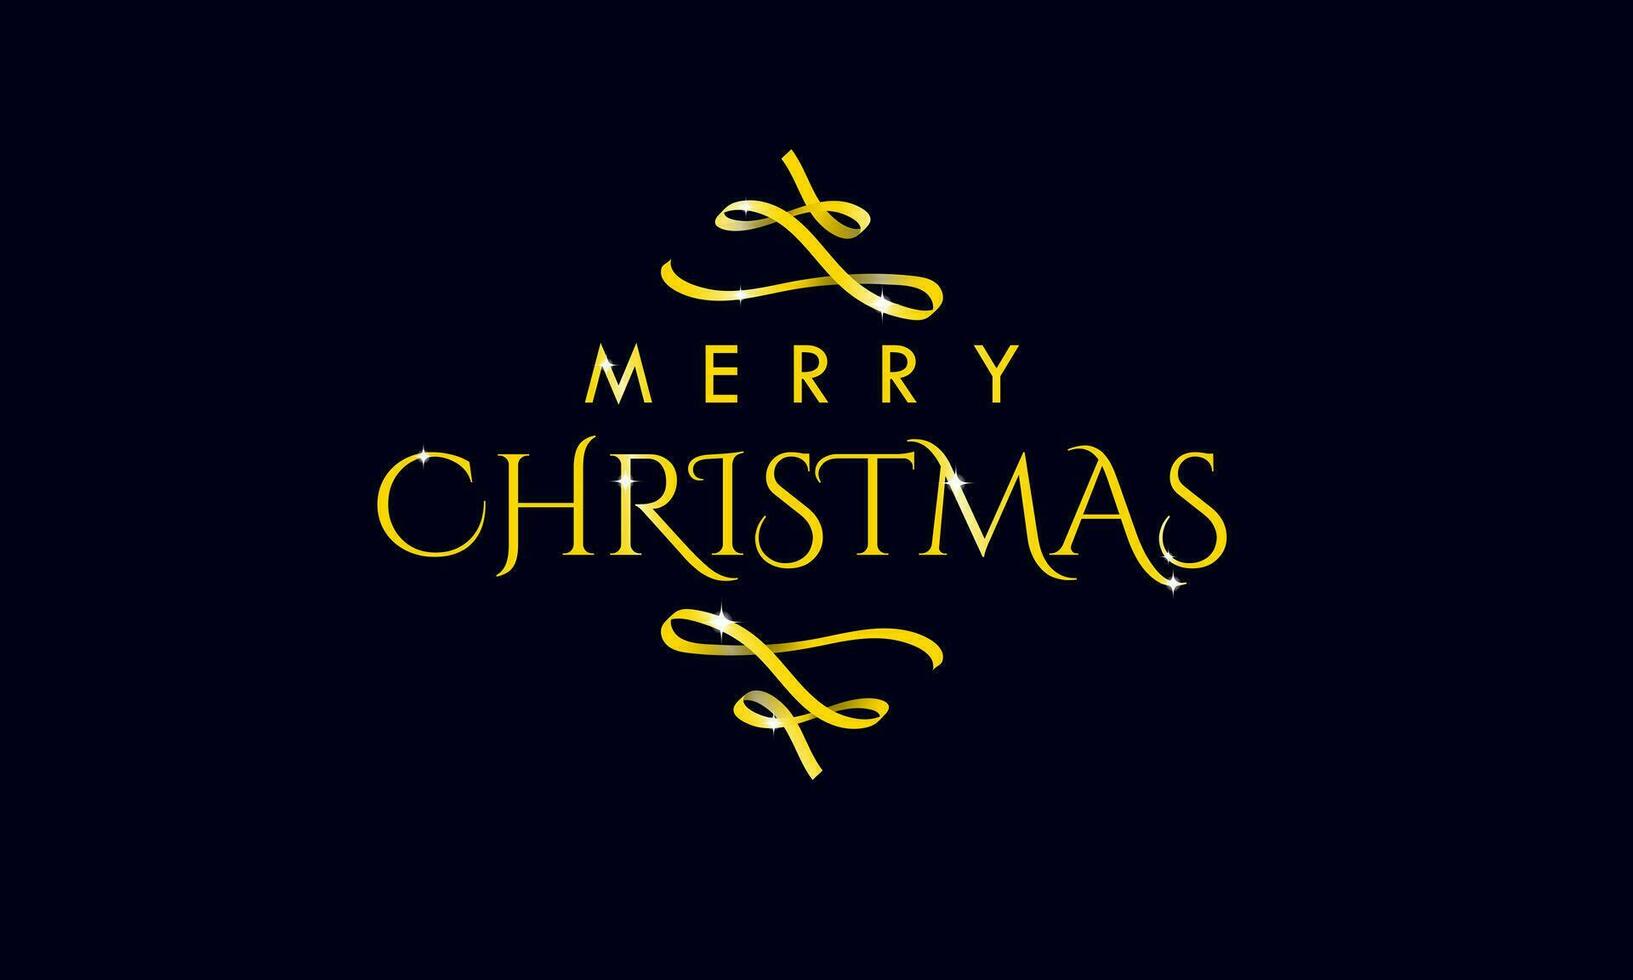 Gold Decorative Merry Christmas Greeting Typography Text with shine isolated on dark blue background. Elegant Merry Christmas Text. Vector Illustration. EPS 10.